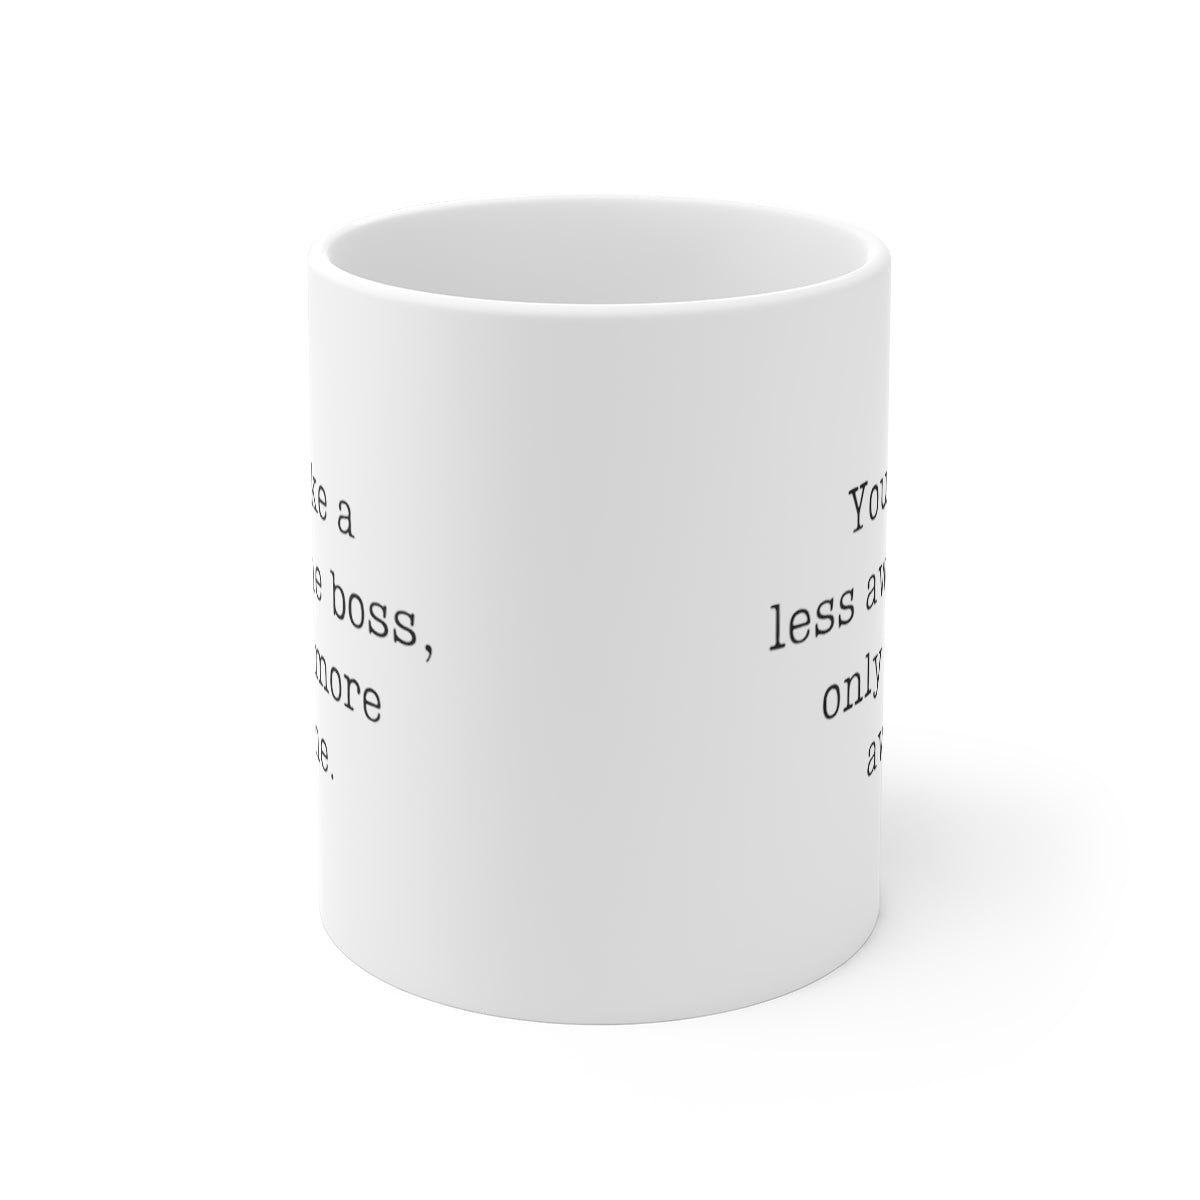 You're Like A Less Awesome Boss, Only Way More Awesome | Funny, Snarky Gift | White Ceramic Mug, Typewriter Font